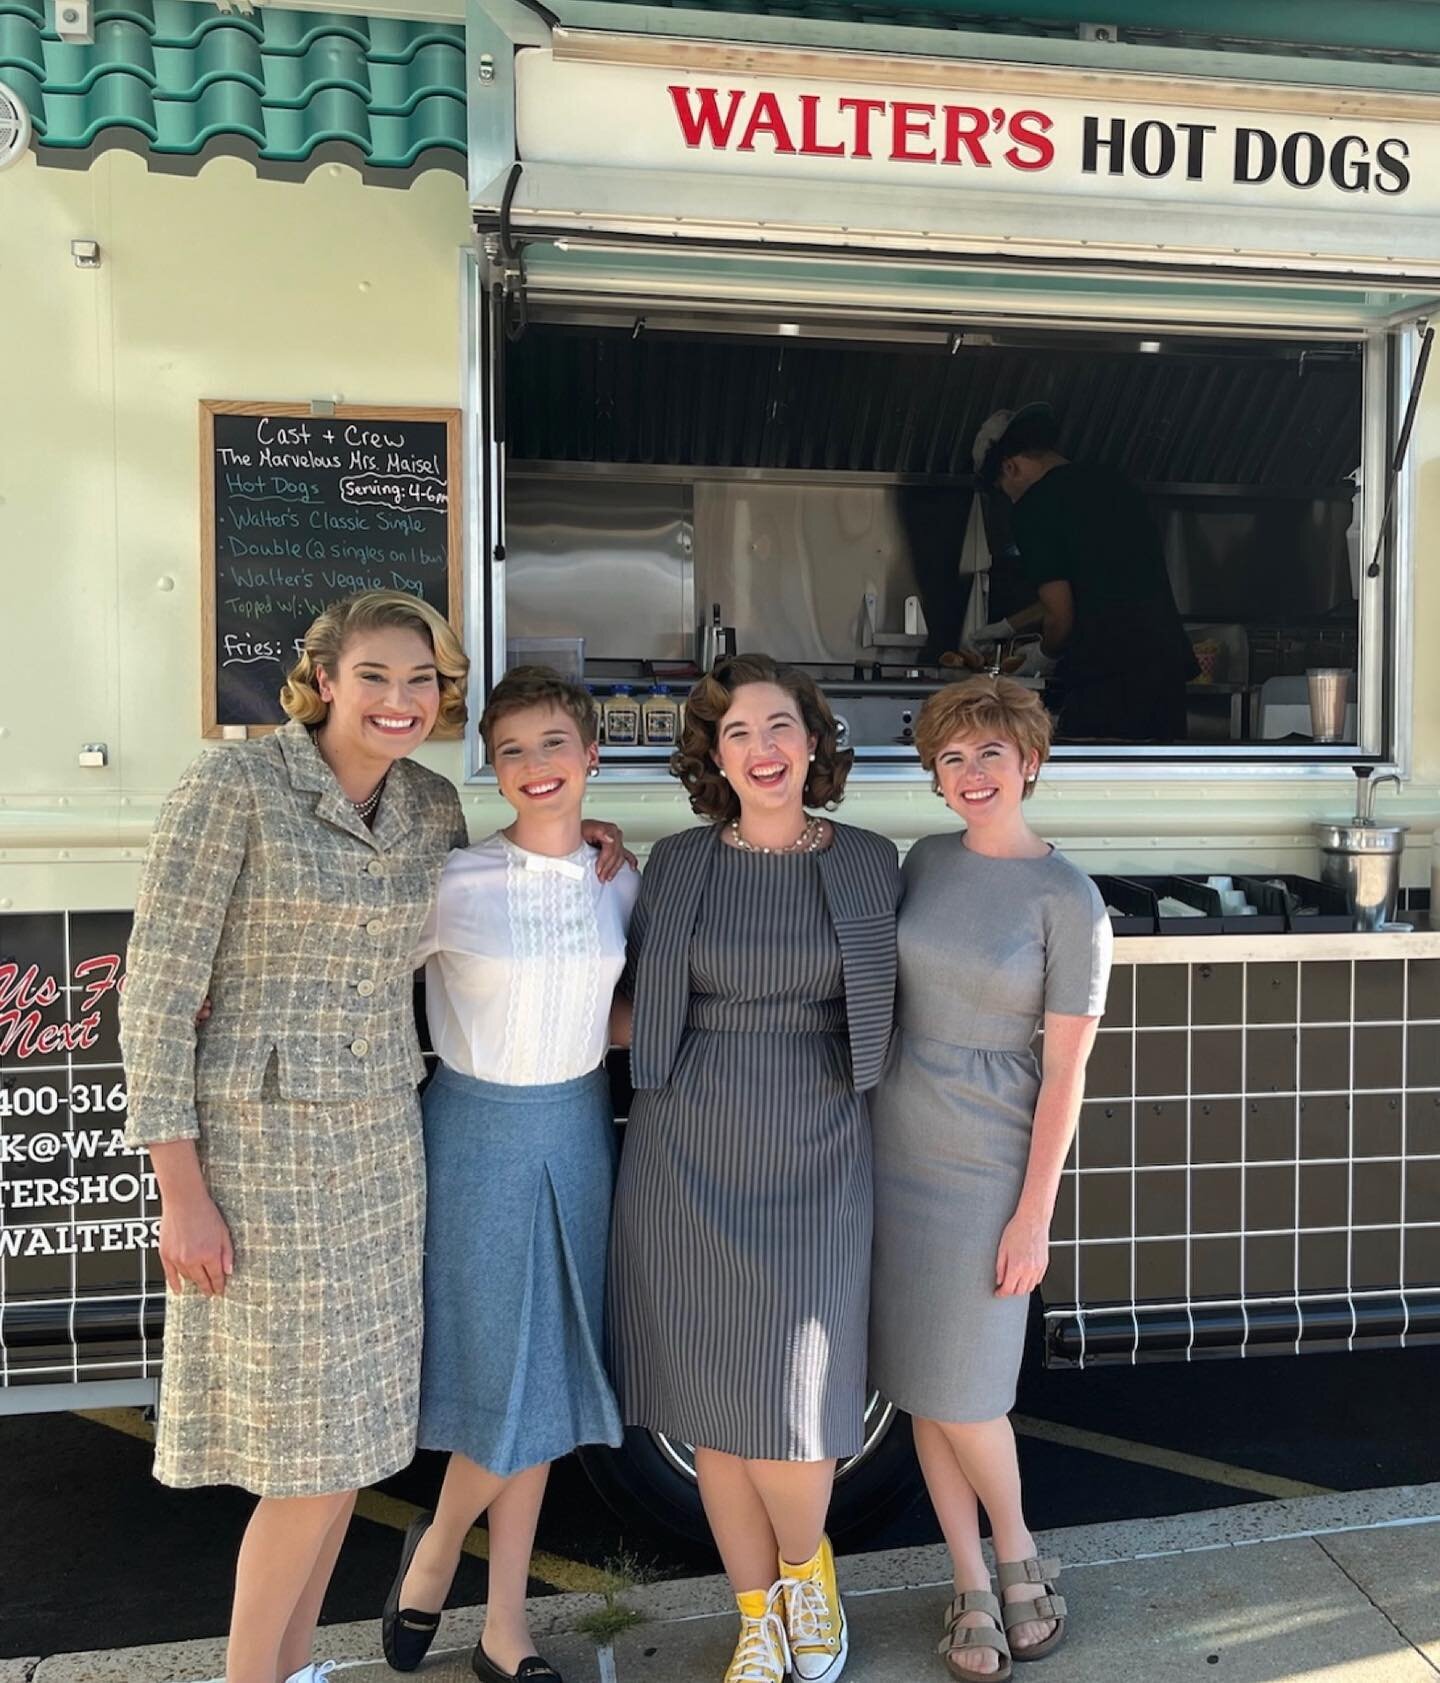 We always appreciate an opportunity to serve our community, especially the hard-working cast and crew on the set of The Marvelous Mrs. Maisel! 
🌭 + 🎬 = 😋🤩

#MrsMaisel #PrimeVideo #Waltershotdogs